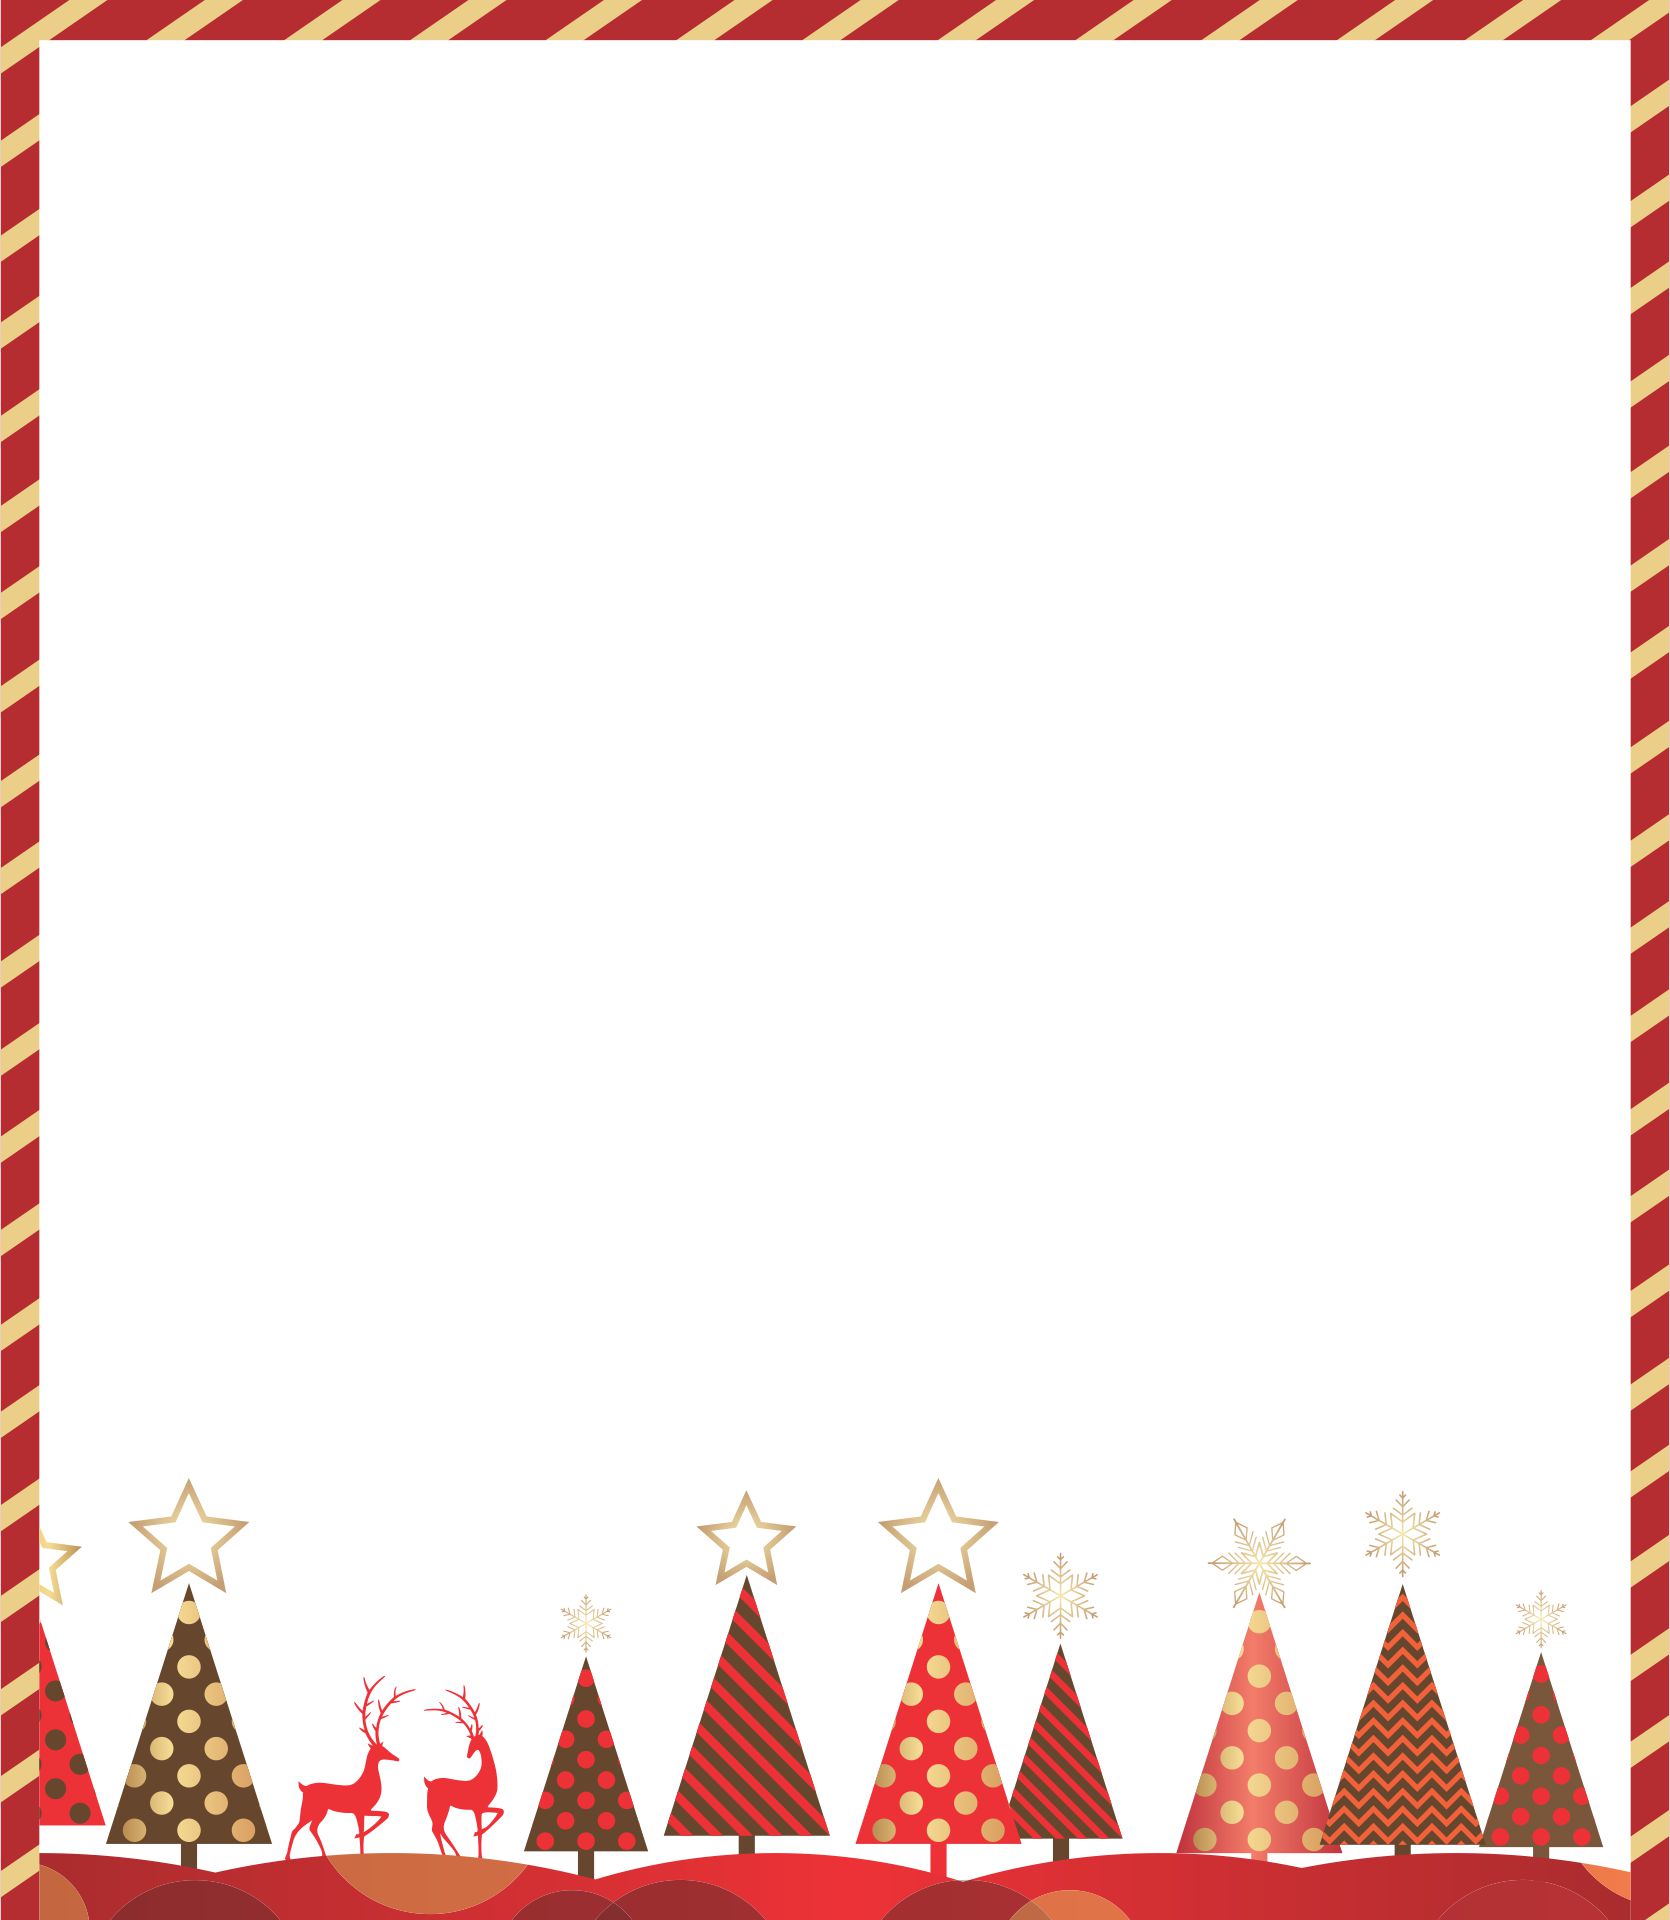 15 Best Free Printable Christmas Borders For Flyers PDF For Free At Printablee